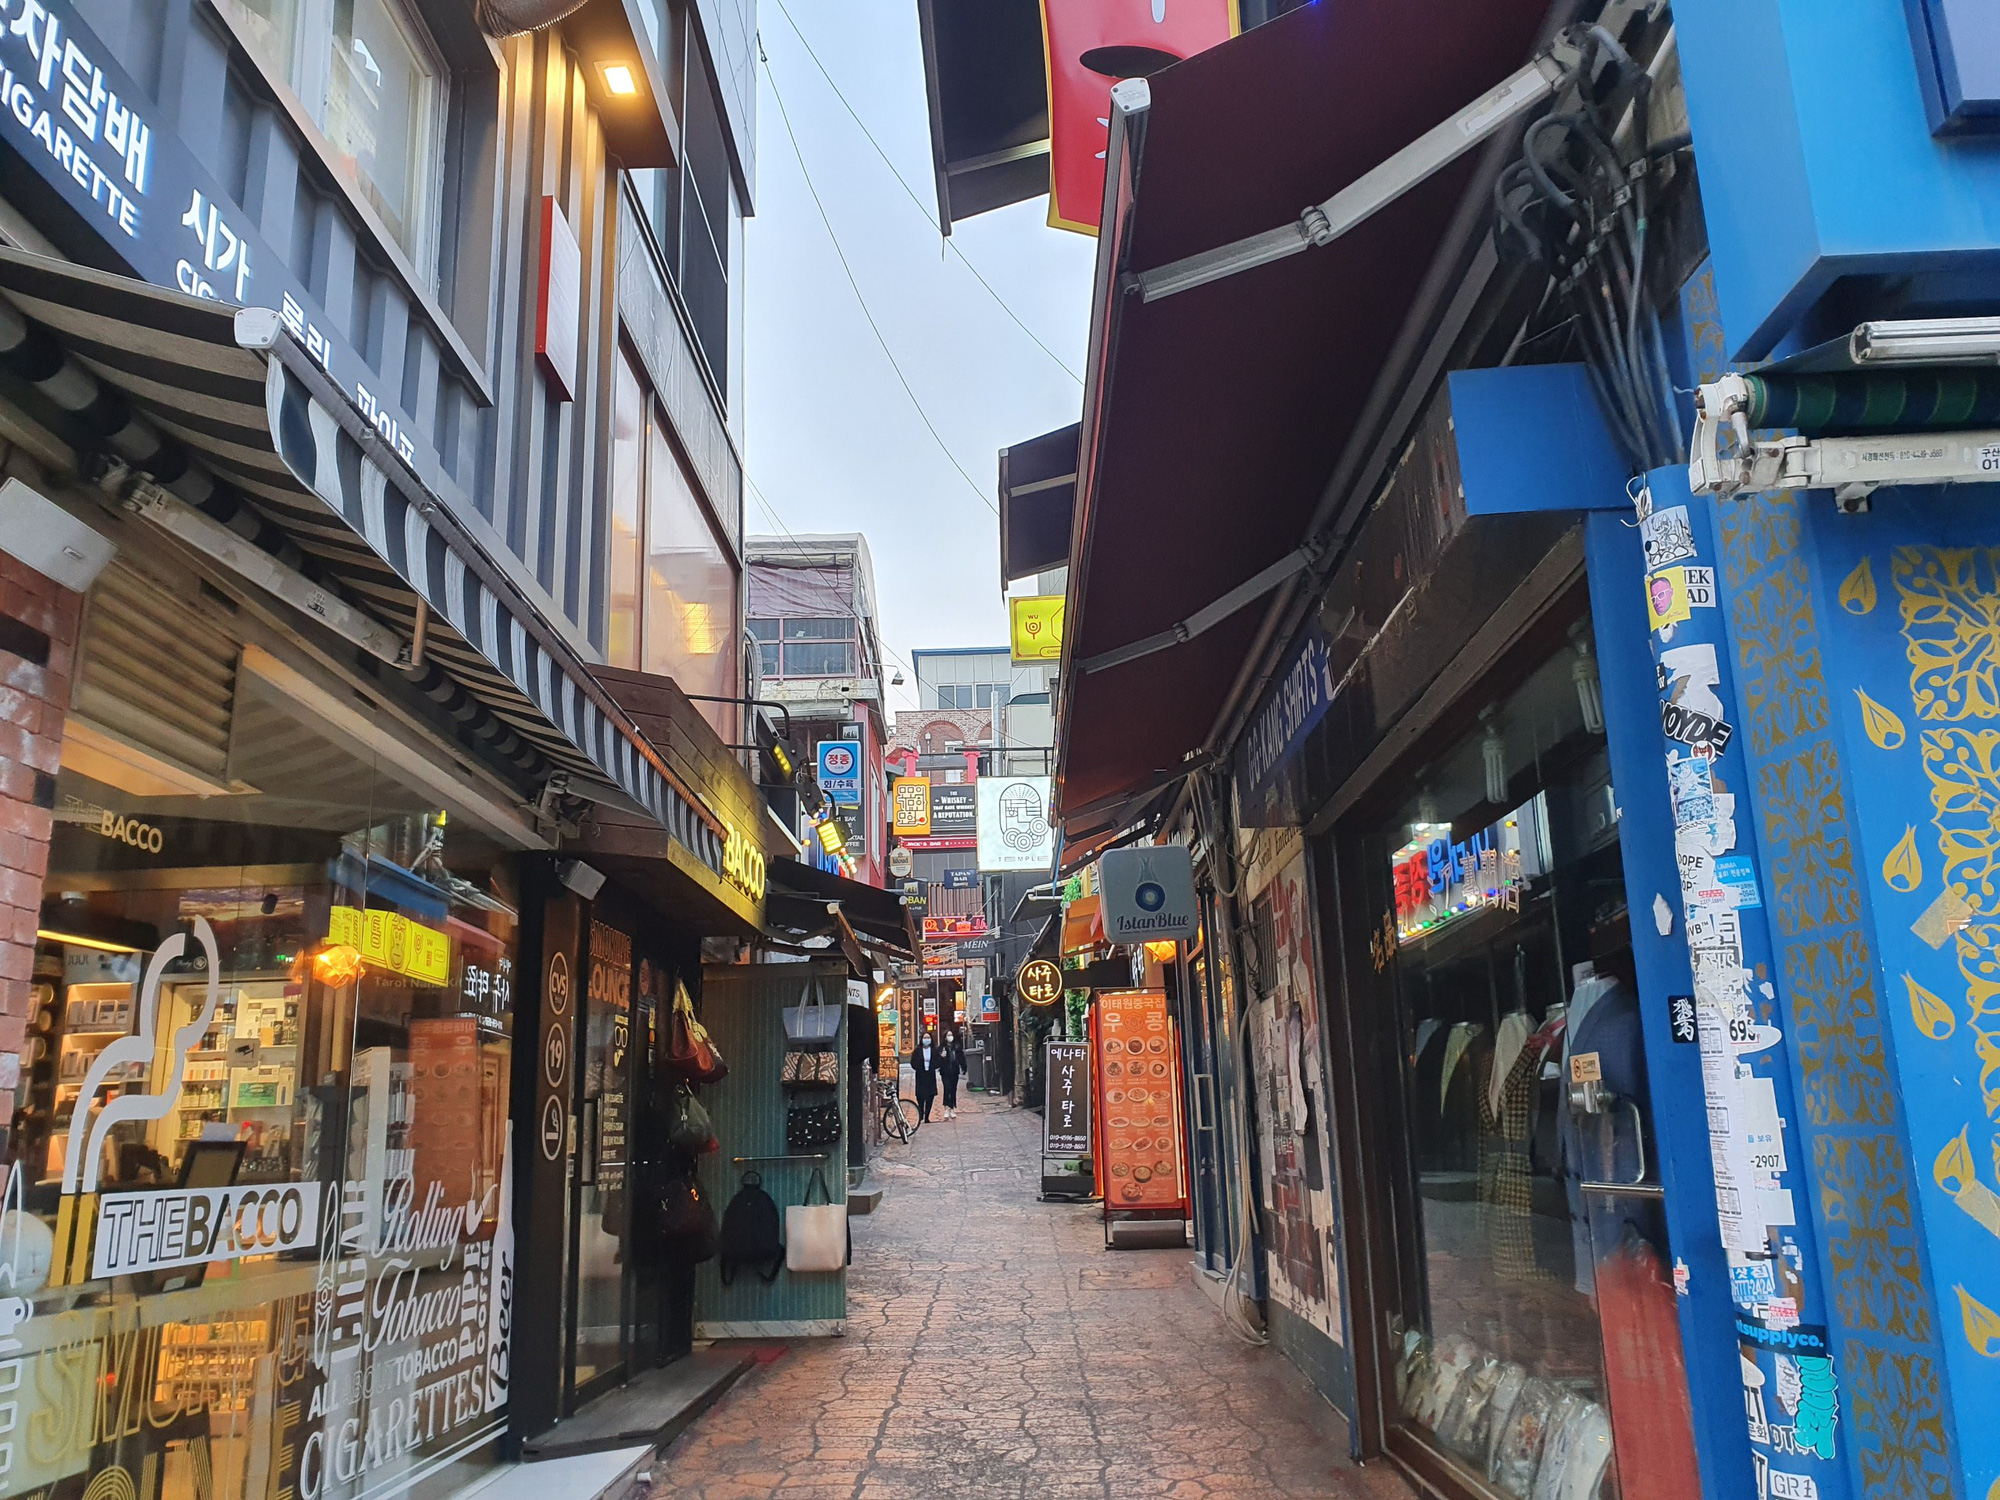 Due to the impact of the COVID-19 epidemic in South Korea, stores in Itaewon opens later than usual. The stores are often open from afternoon until morning so the streets are quite empty during the day. Photo: Le Dung / Tuoi Tre